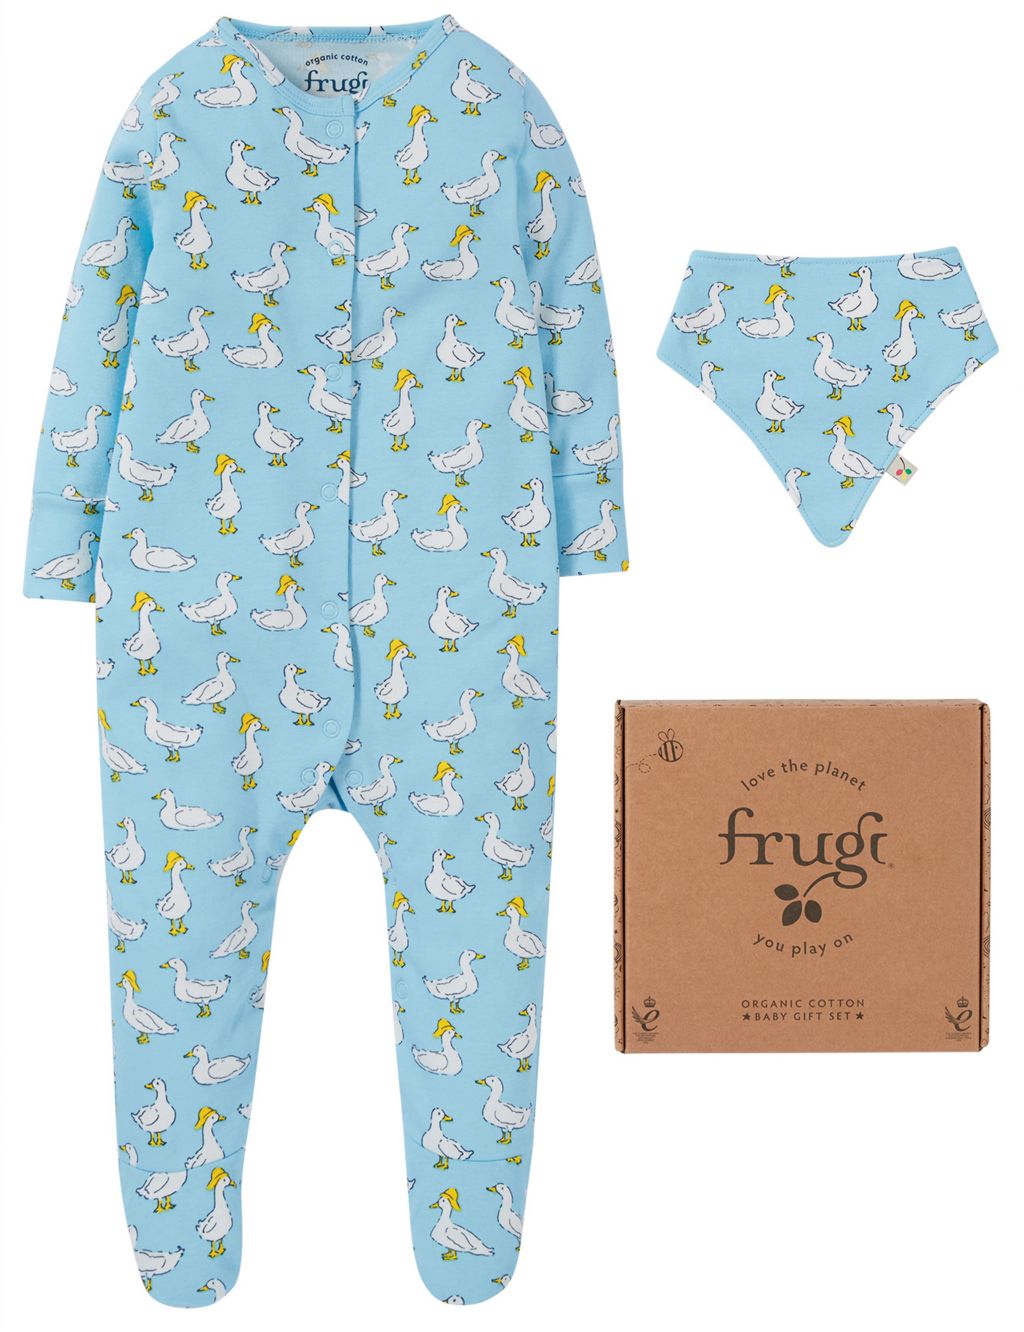 2pc Organic Cotton Sleepsuit Outfit (0-12 Mths)